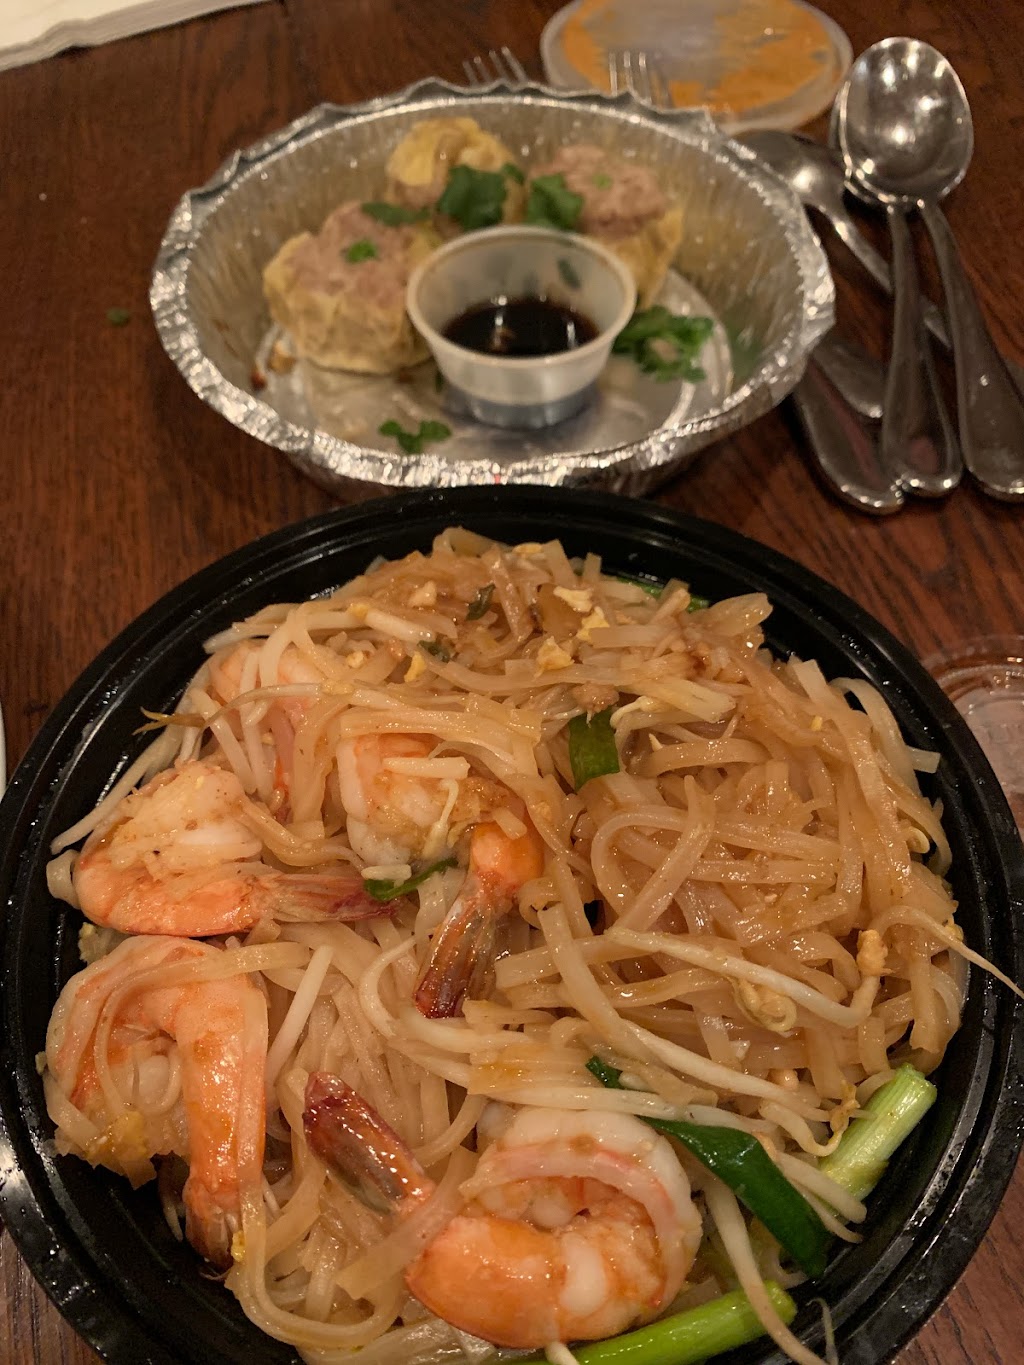 Thai Dishes | 1924 Pleasantville Rd, Briarcliff Manor, NY 10510 | Phone: (914) 373-4313